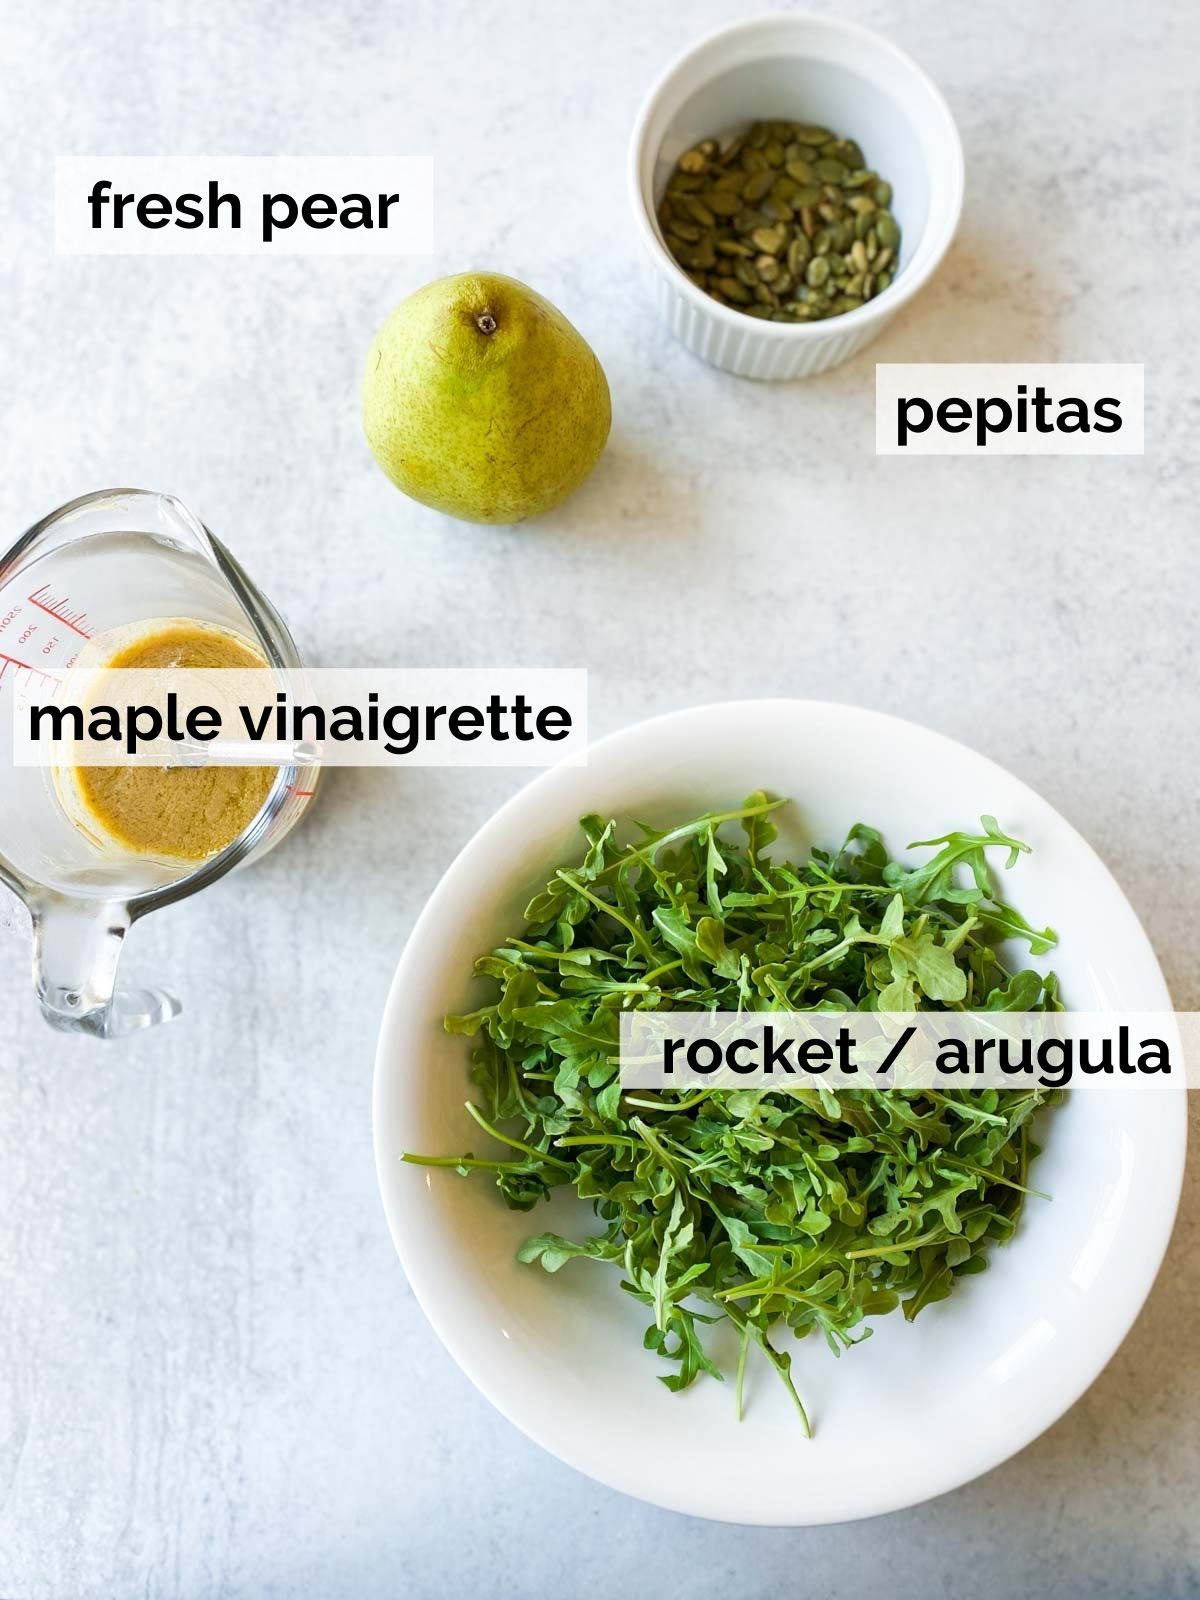 Pear and rocket ingredients on a table.